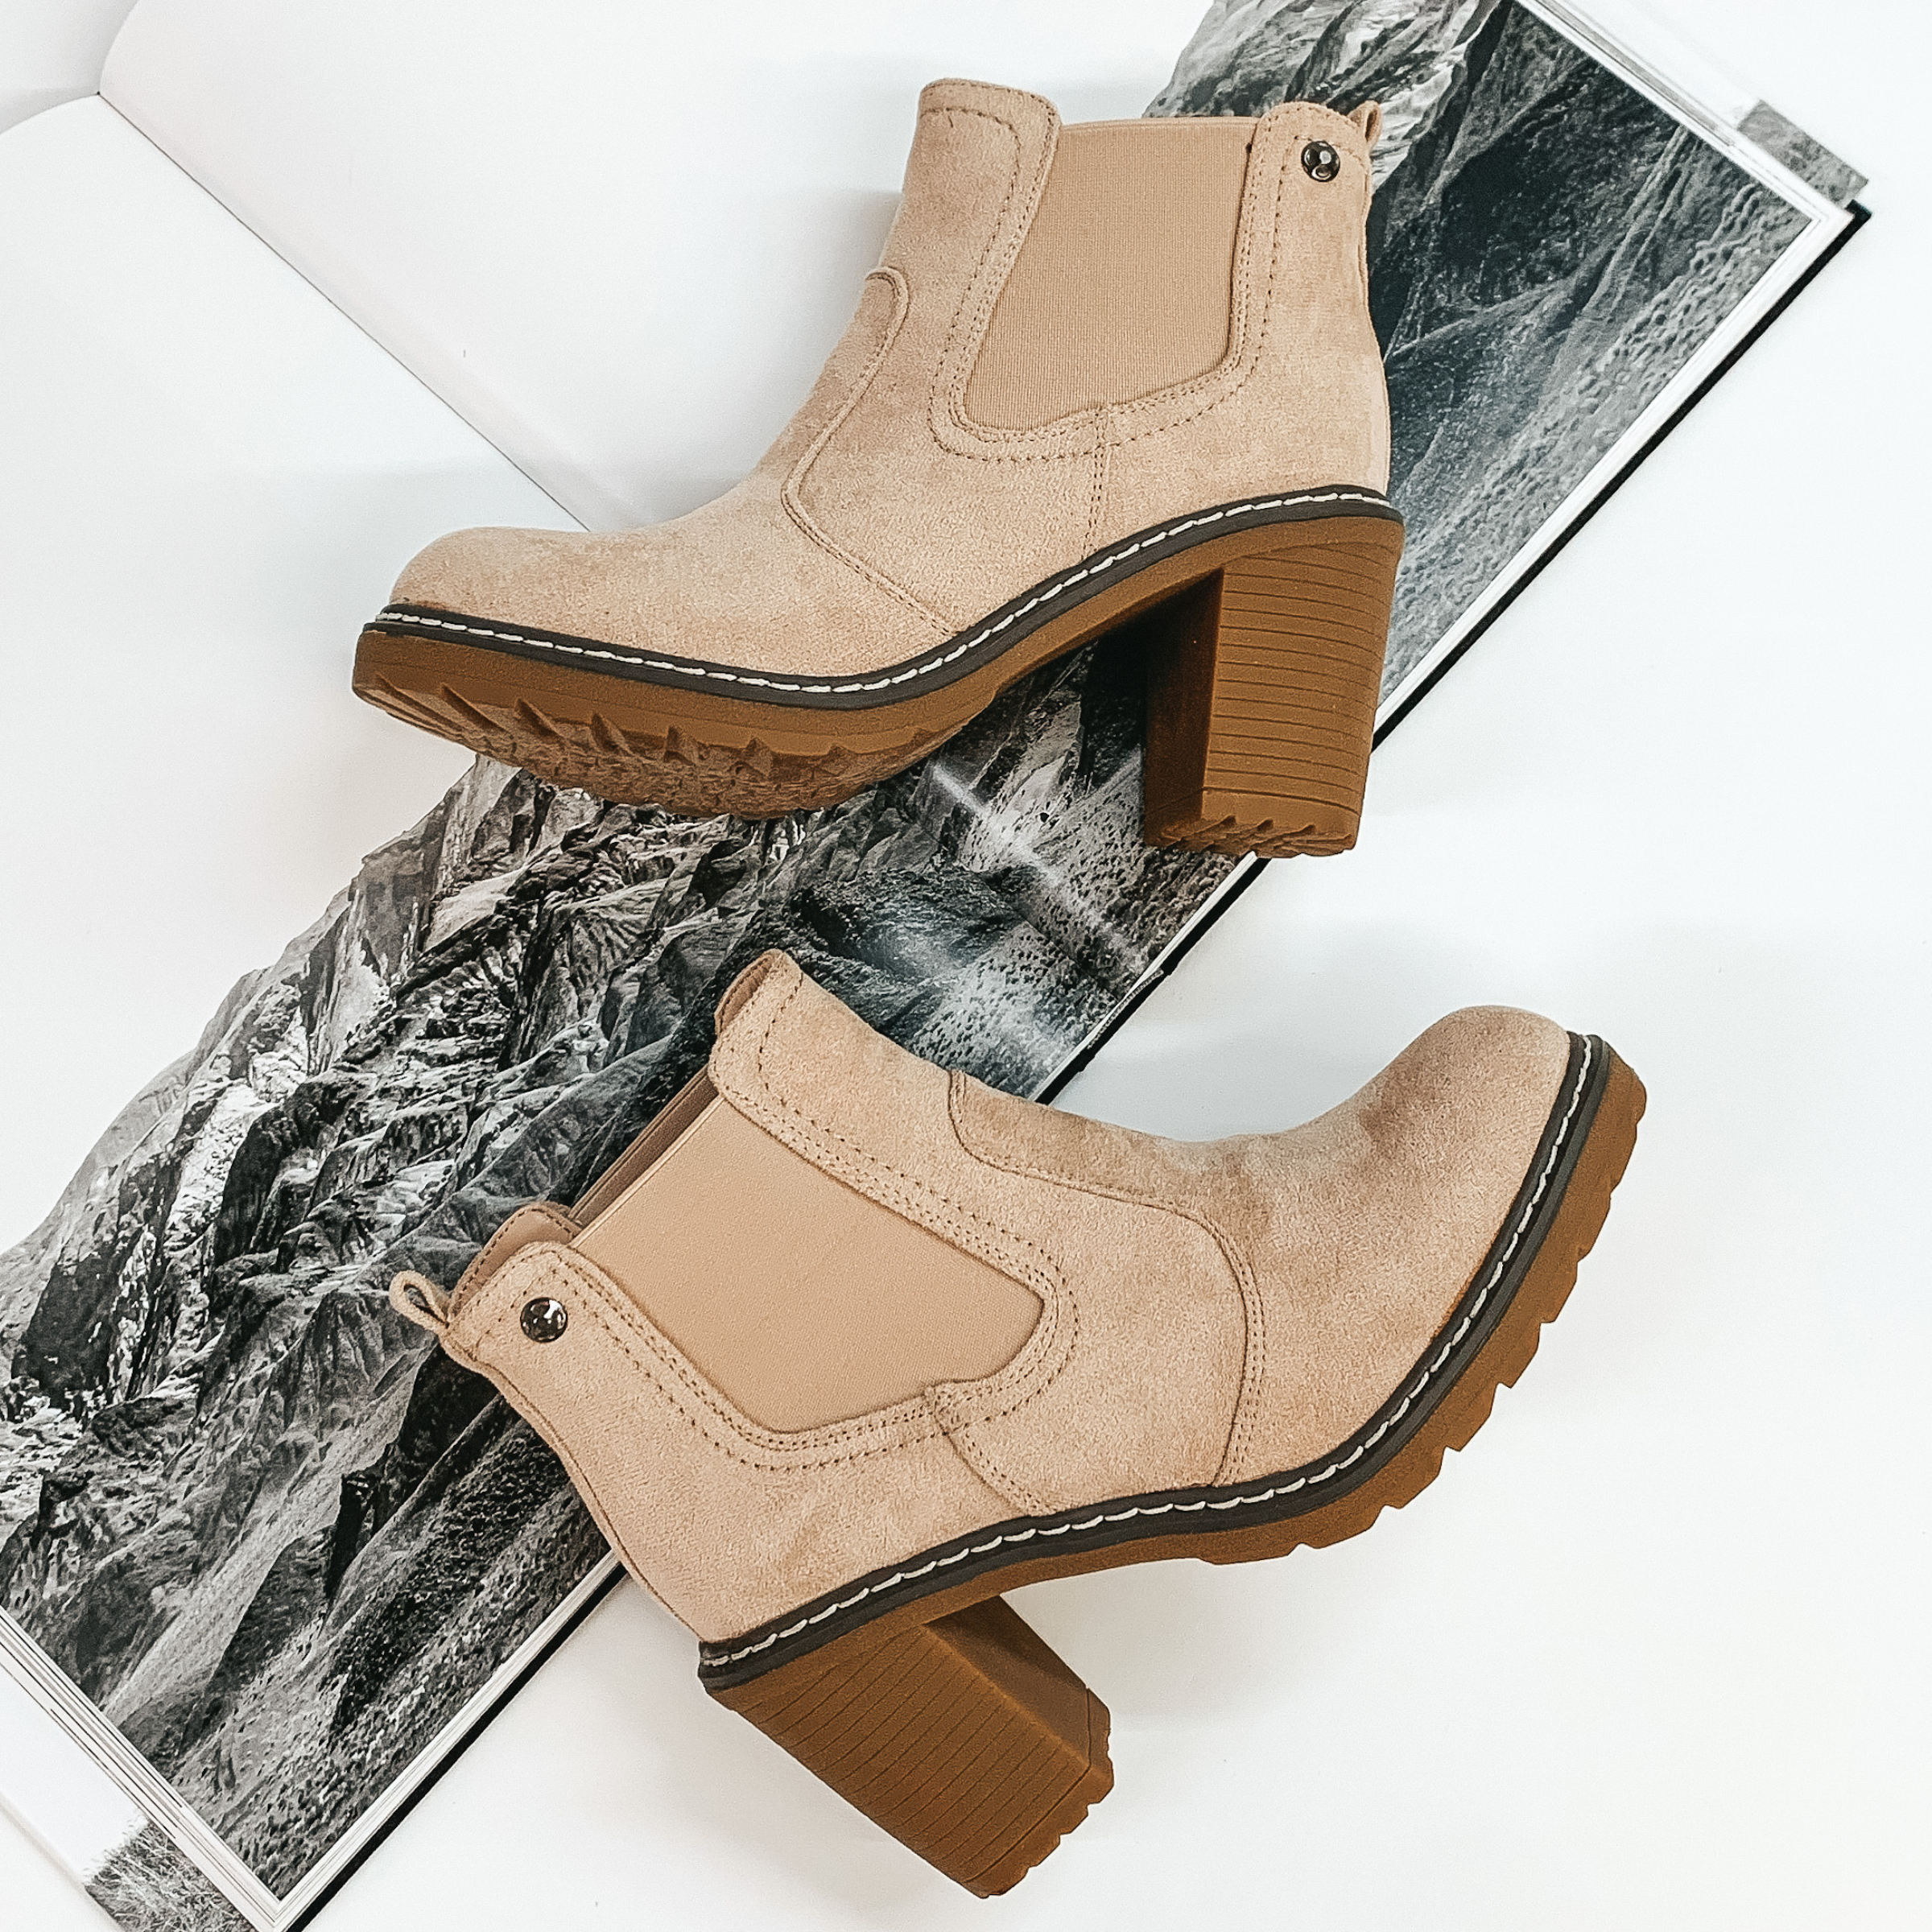 Tan suede booties with a tan rubber sole and chunky heel. These booties are pictured laying on an open book on a white background. 